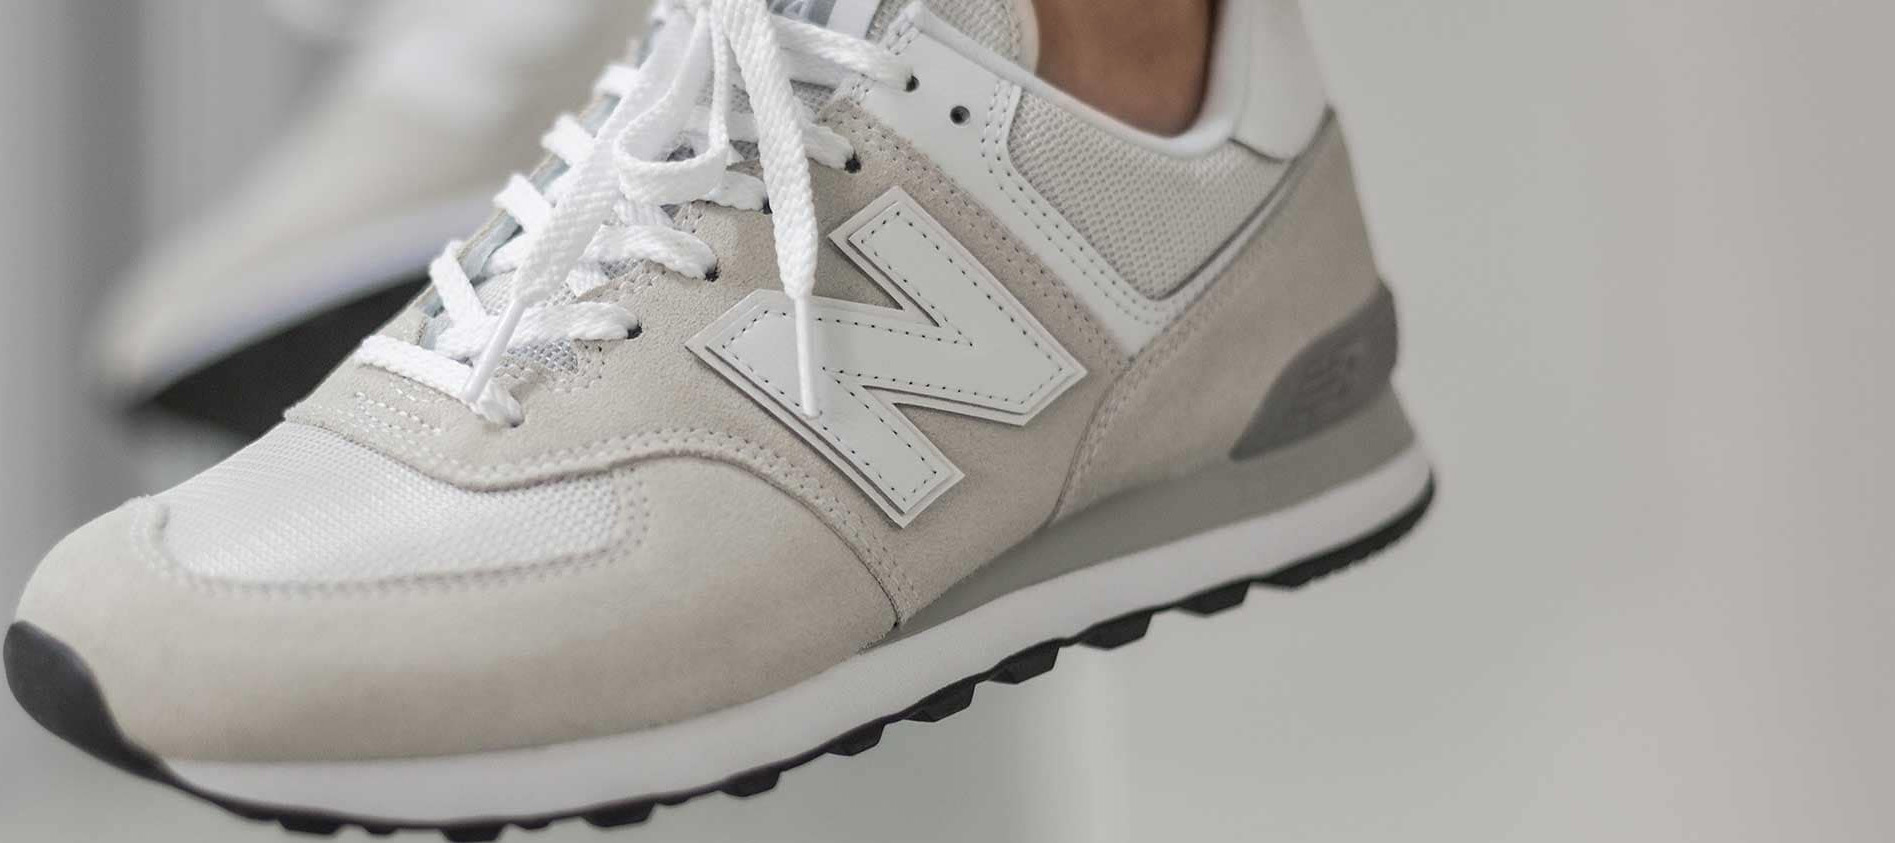 Connection under Helplessness Joe's New Balance takes extra 25% off clearance + up to 60% off sitewide